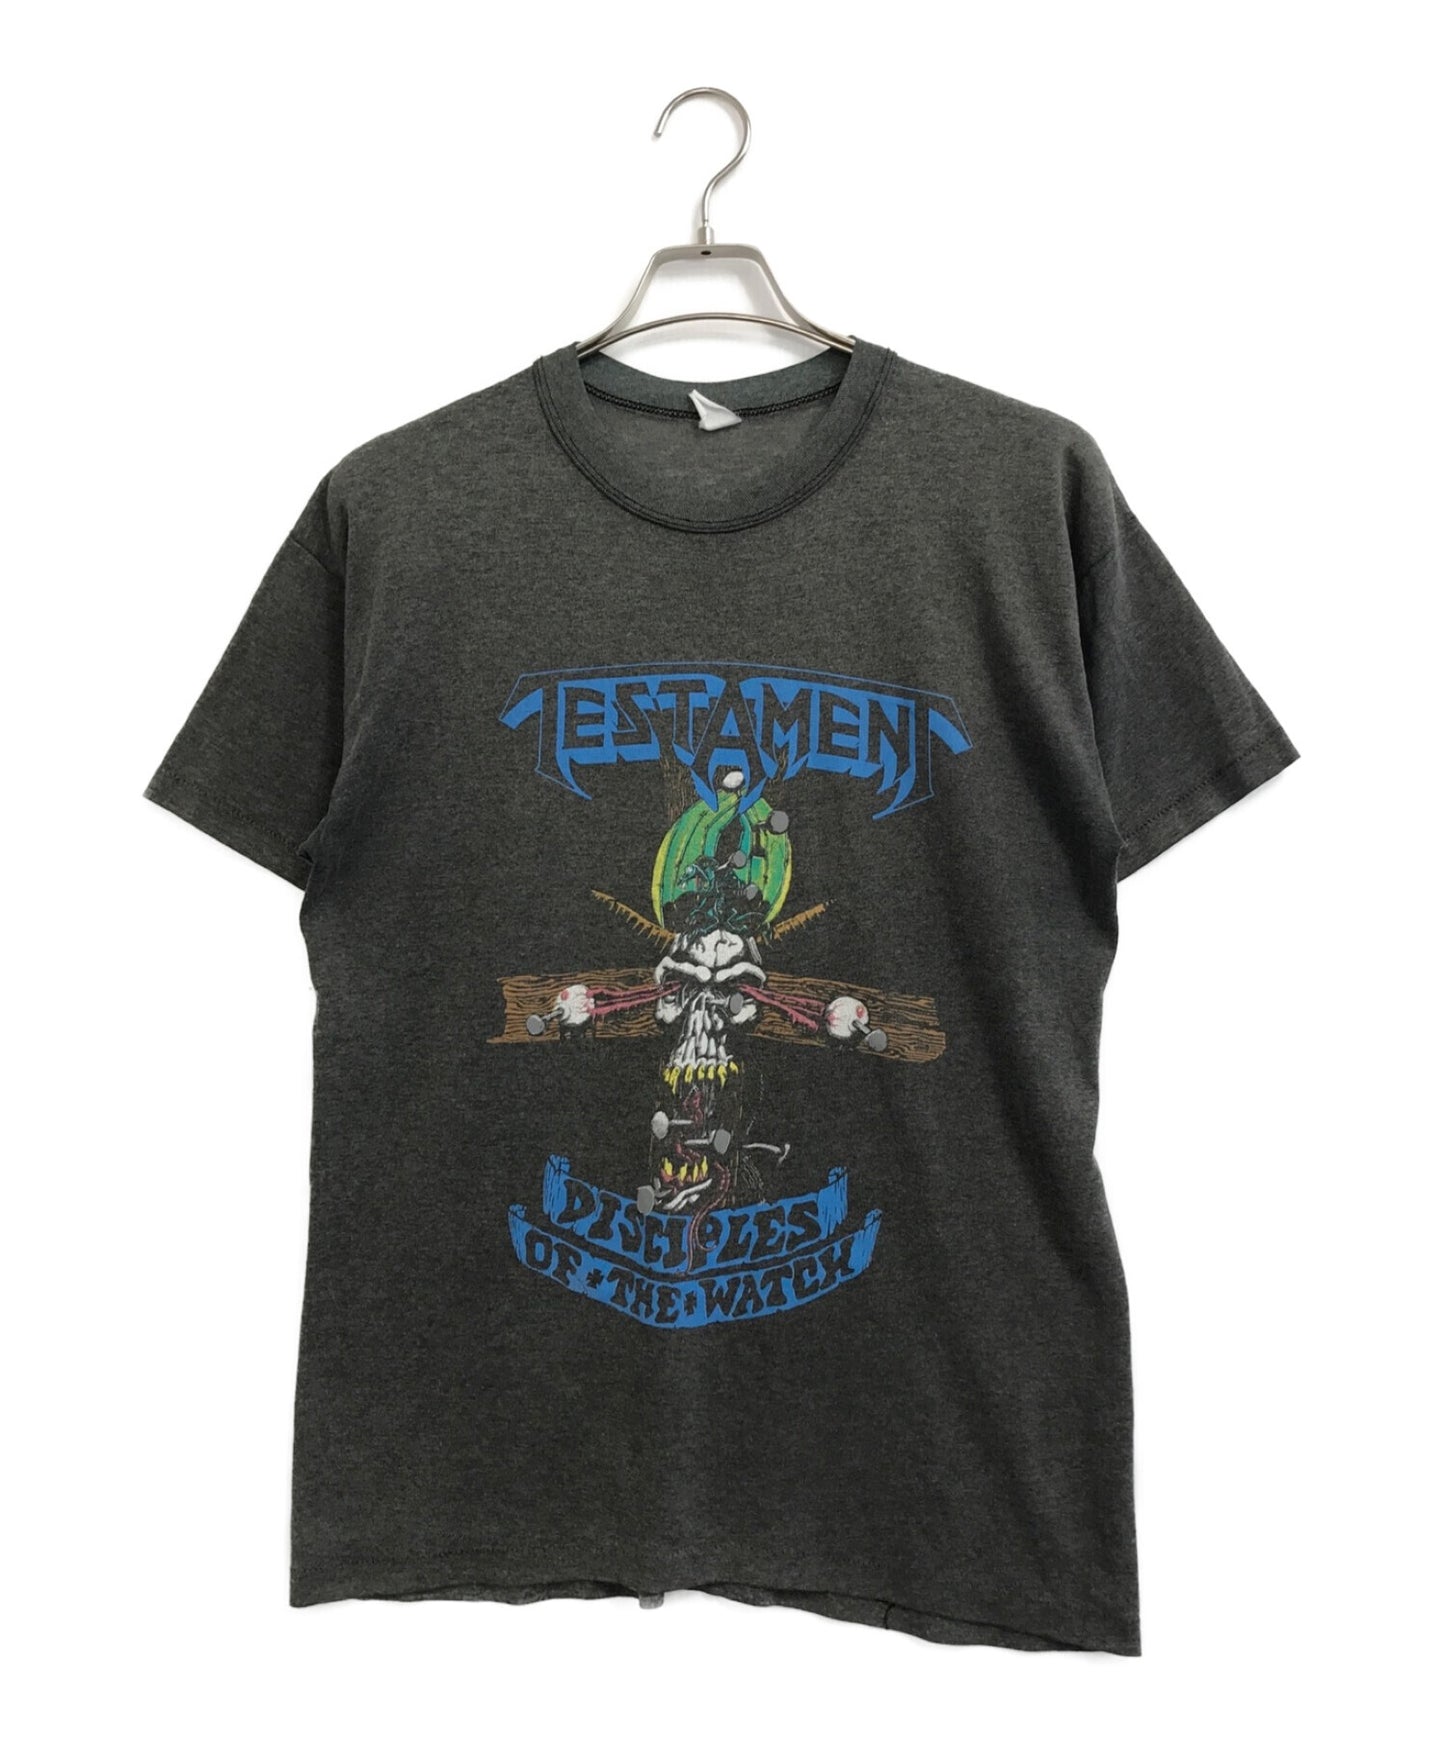 [Pre-owned] TESTAMENT Band T-shirt